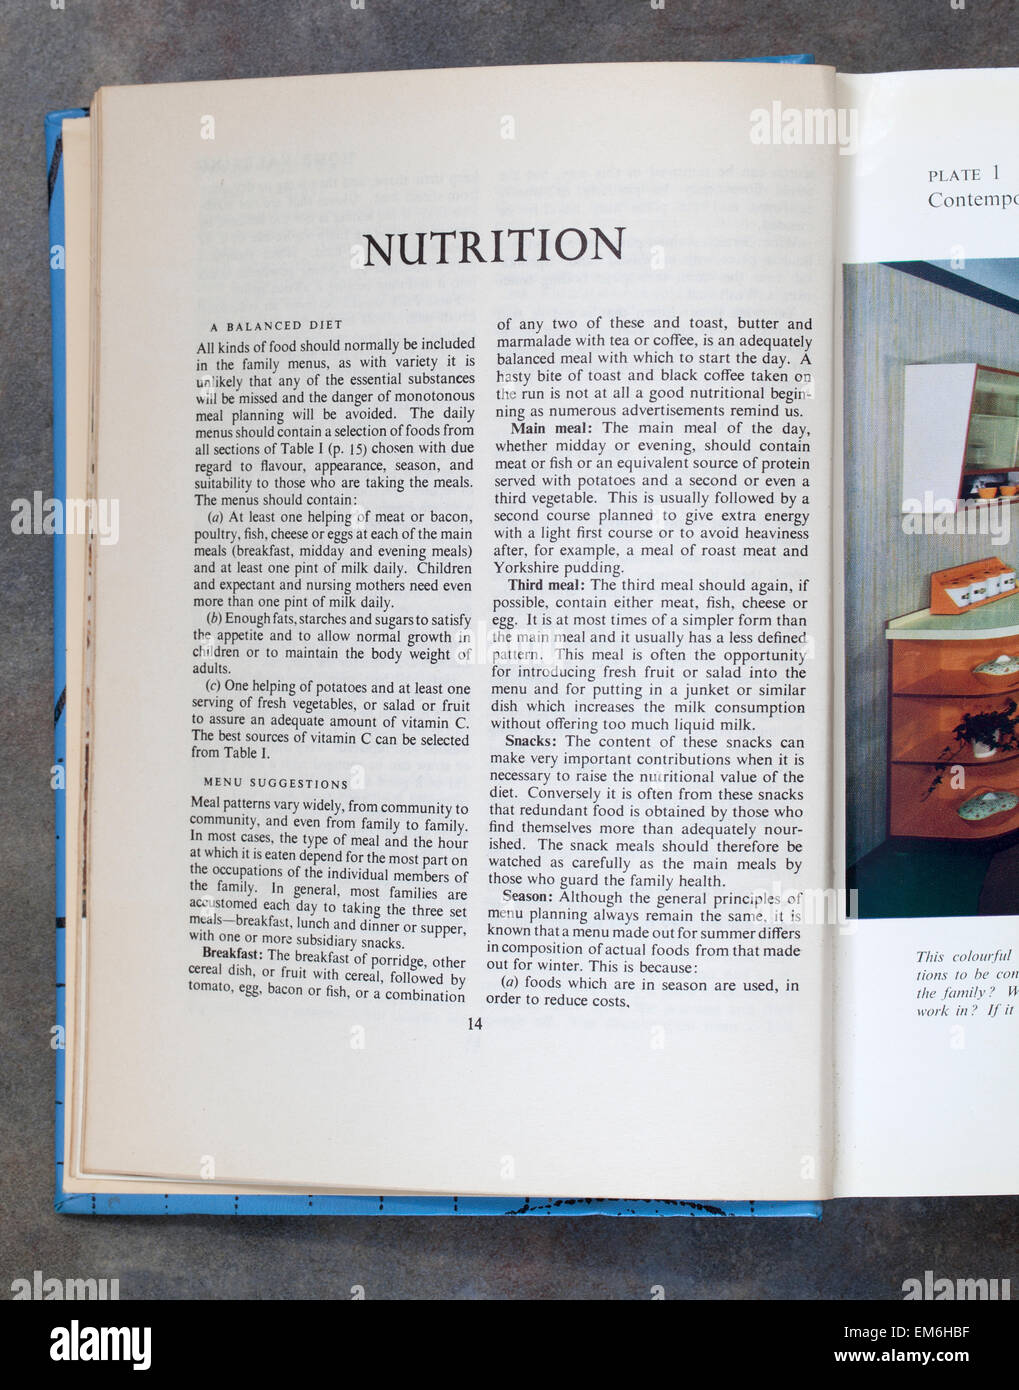 Nutrition Chapter Page from Mrs Beetons Everyday Cookery Book Stock Photo